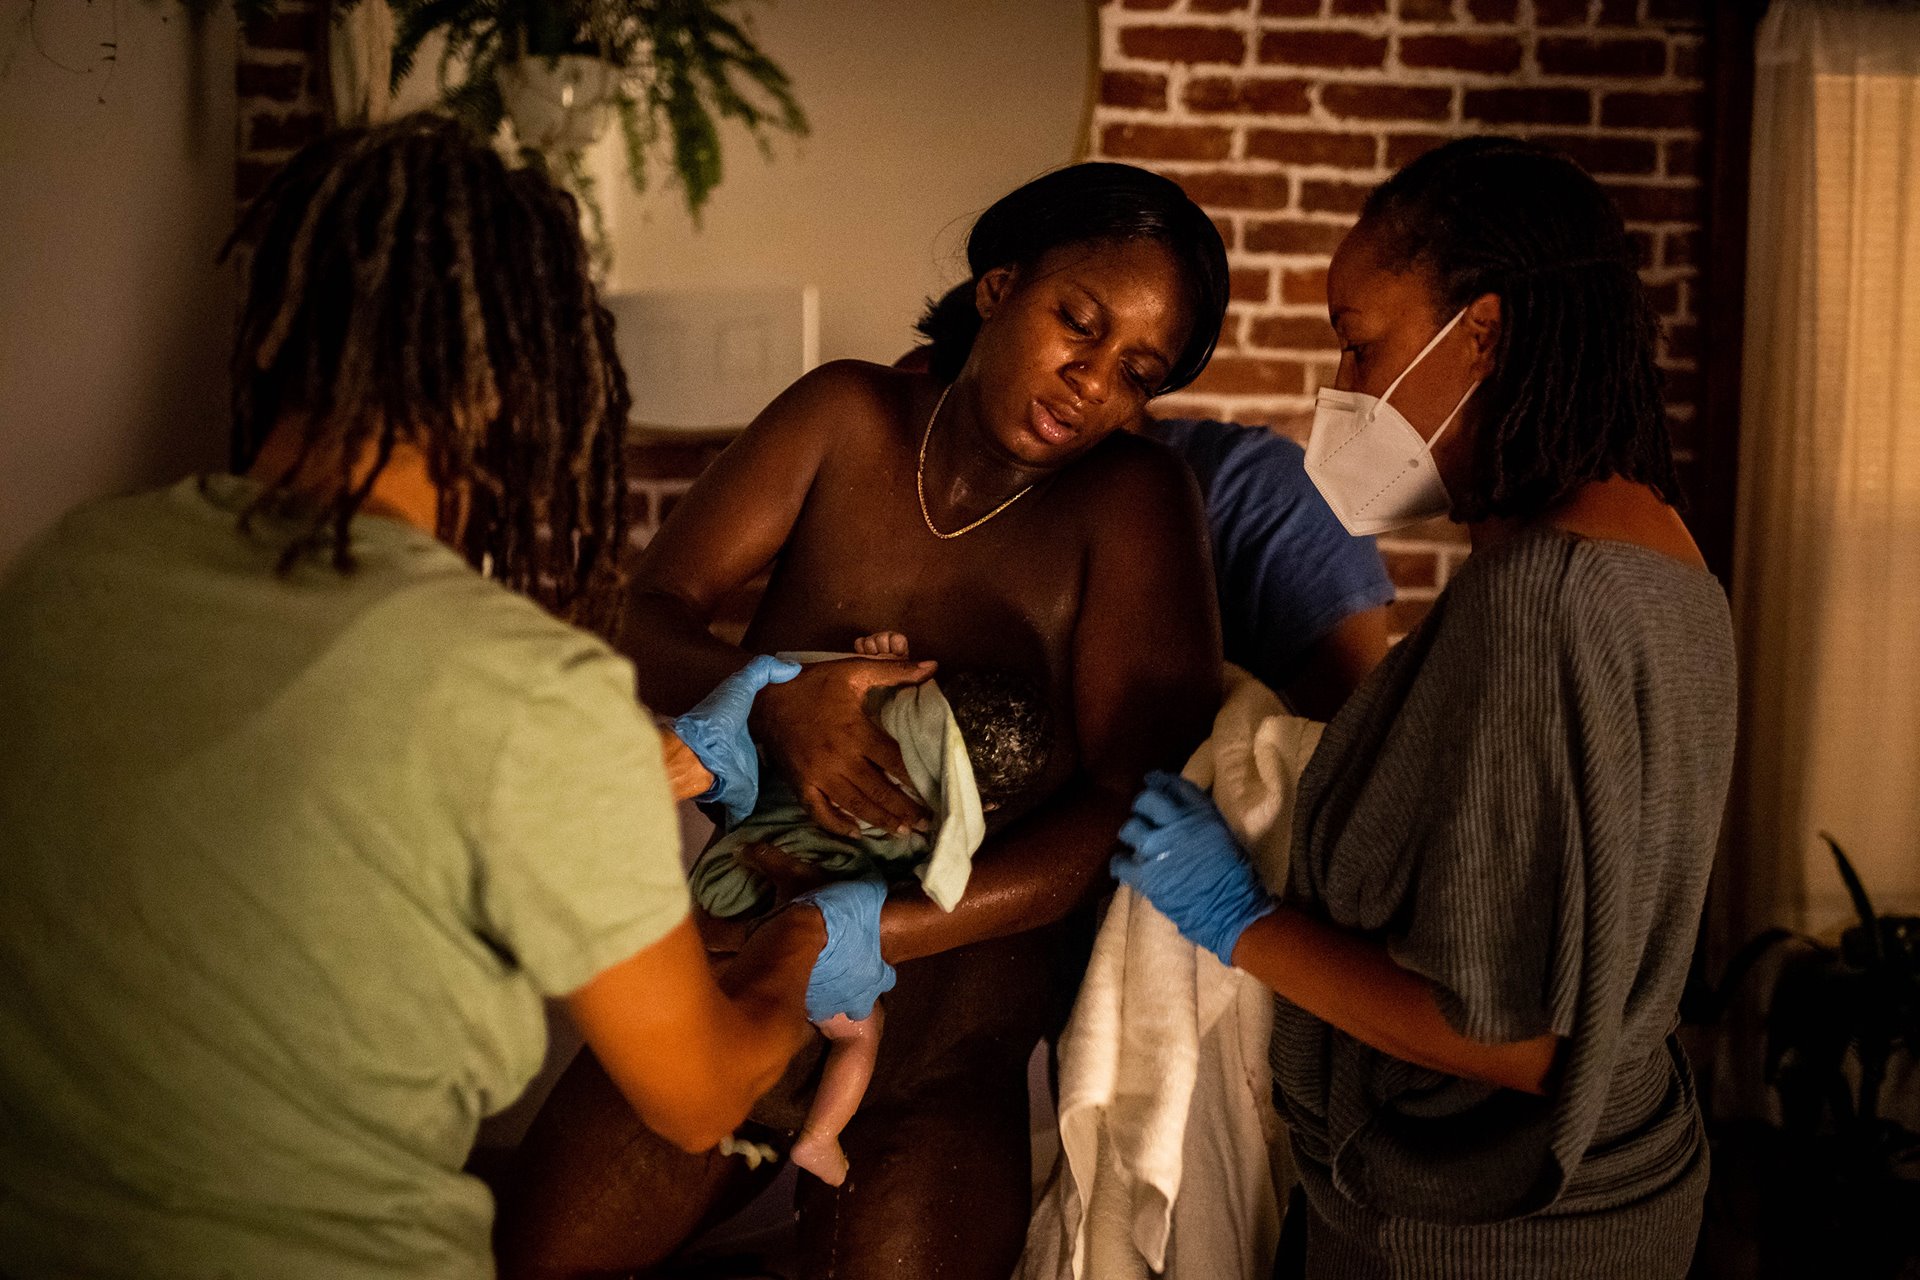 Midwives Kimberly Durdin and Allegra Hill help Aysha out of the birthing bath at the Kindred Space LA birthing center, in South Los Angeles, USA. The two midwives opened their South Los Angeles birthing center during the COVID-19 pandemic.